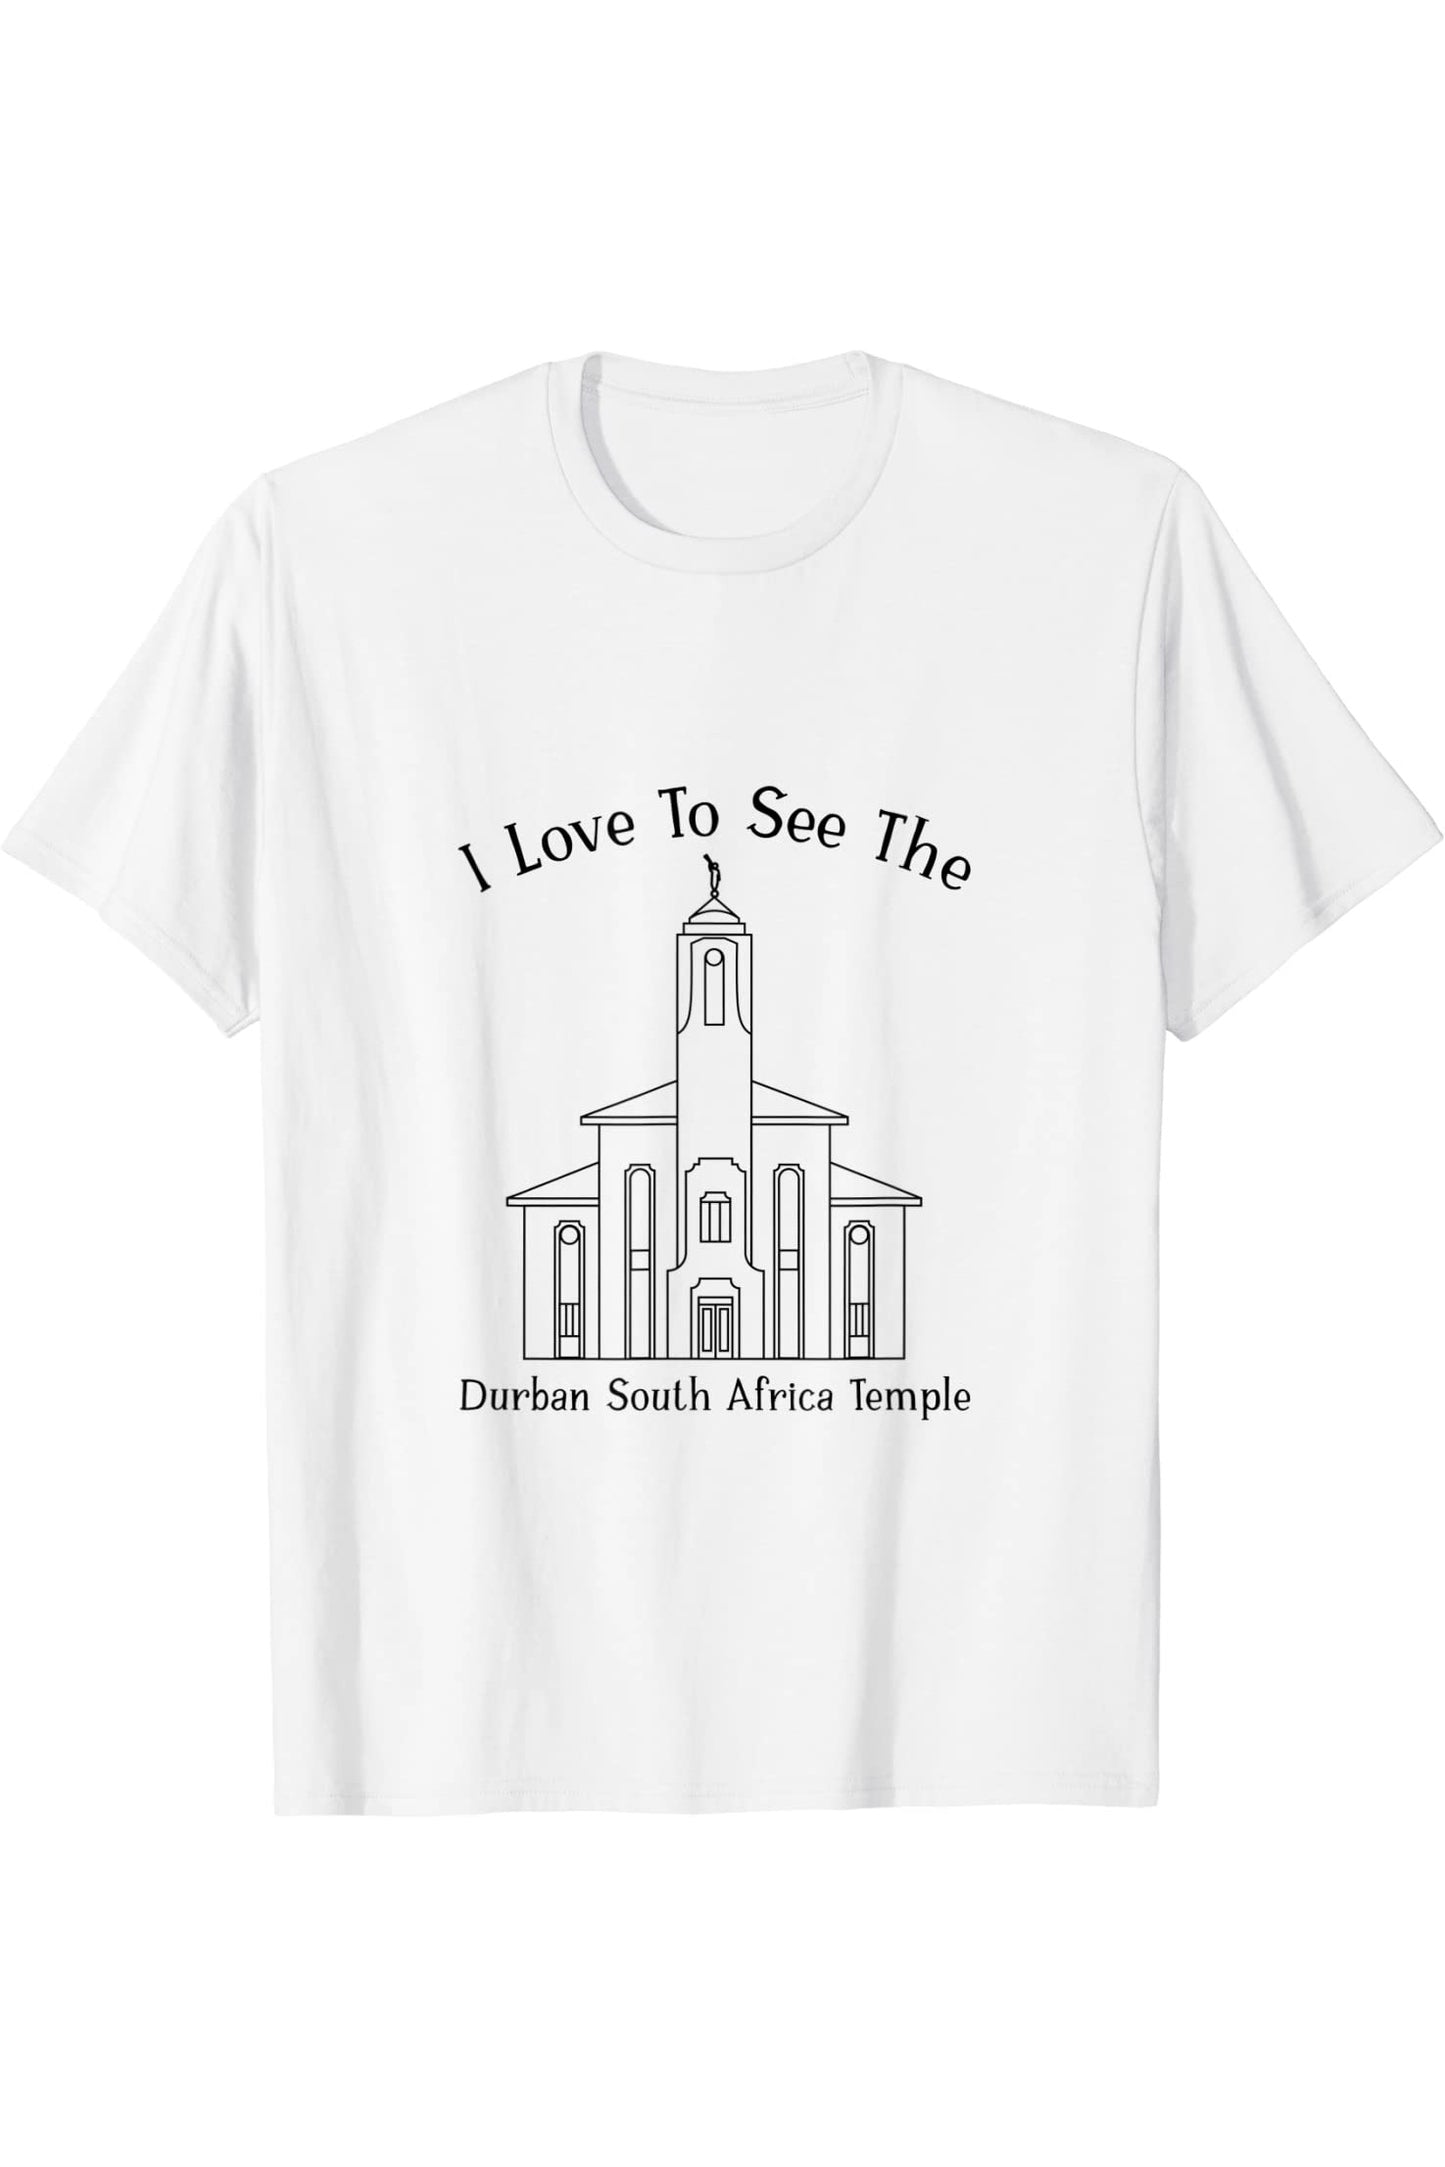 Durban South Africa Temple T-Shirt - Happy Style (English) US